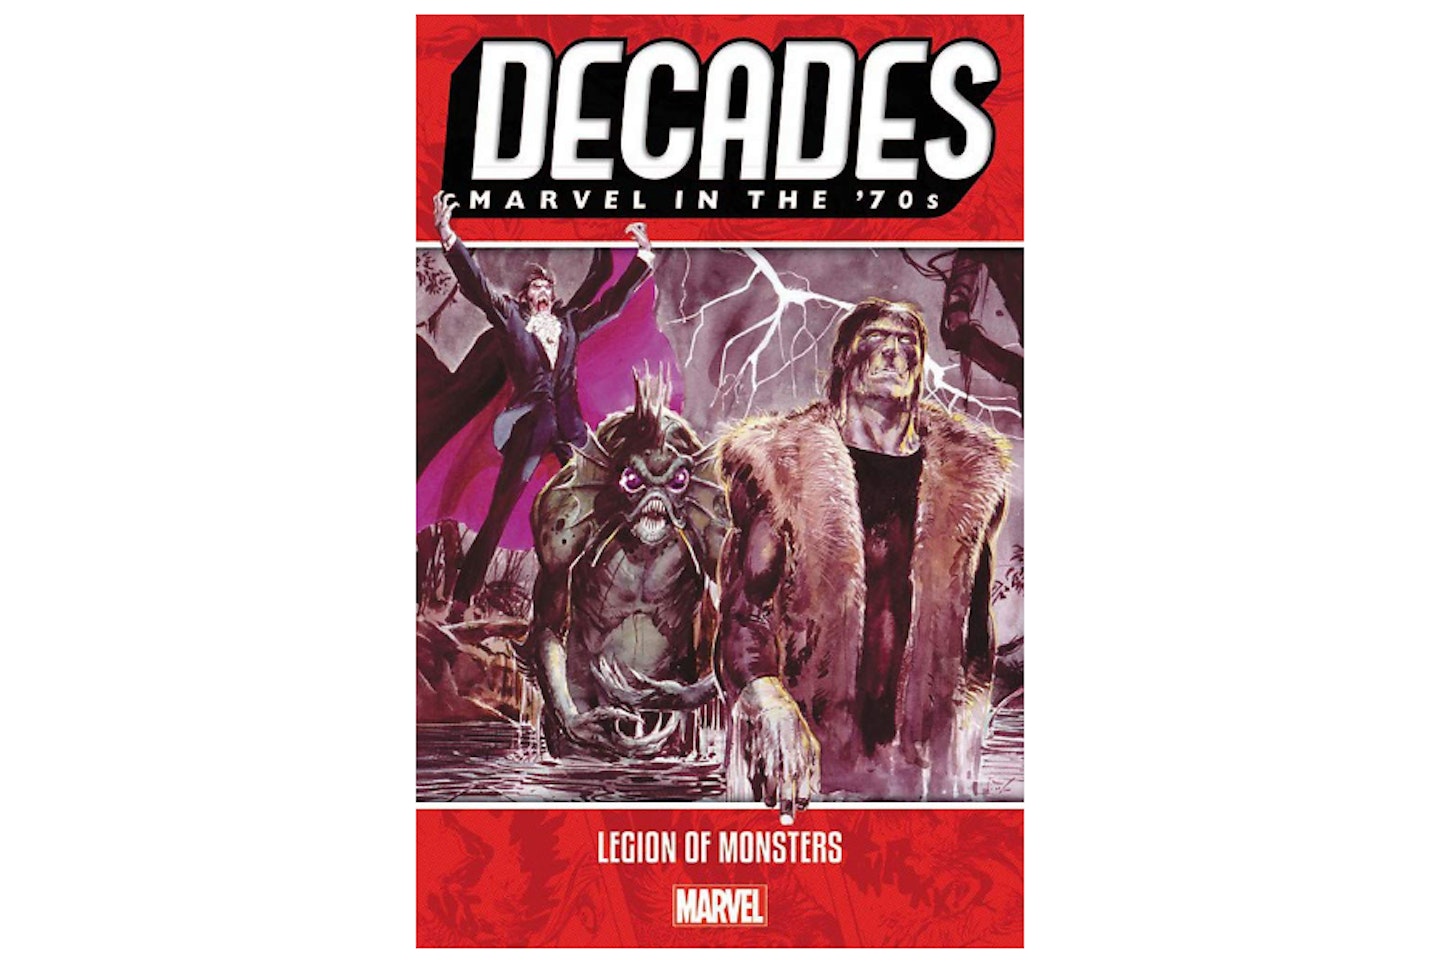 Decades: Marvel In The '70s - Legion Of Monsters, £14.69